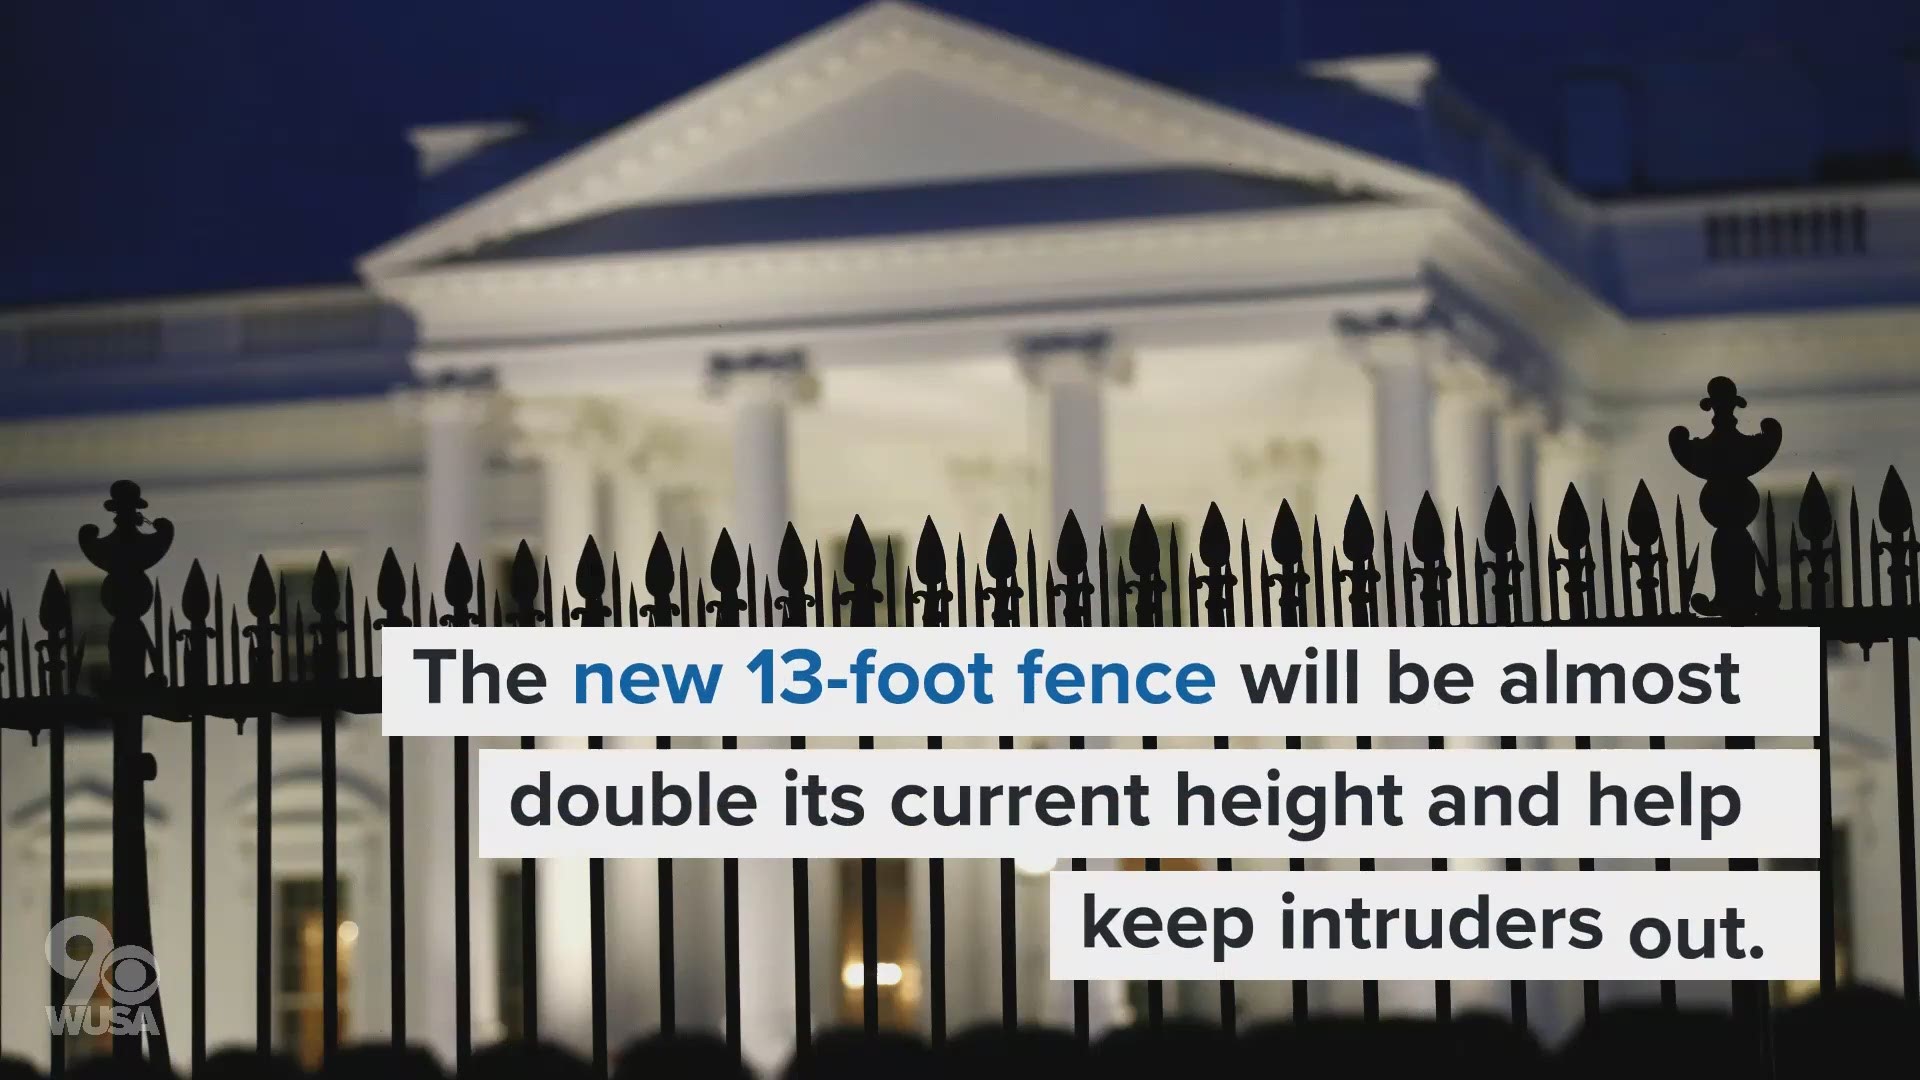 Tourists may find it harder to get that perfect snap of the White House after construction begins on a new 13-foot fence, almost double its current height, to help keep intruders out.